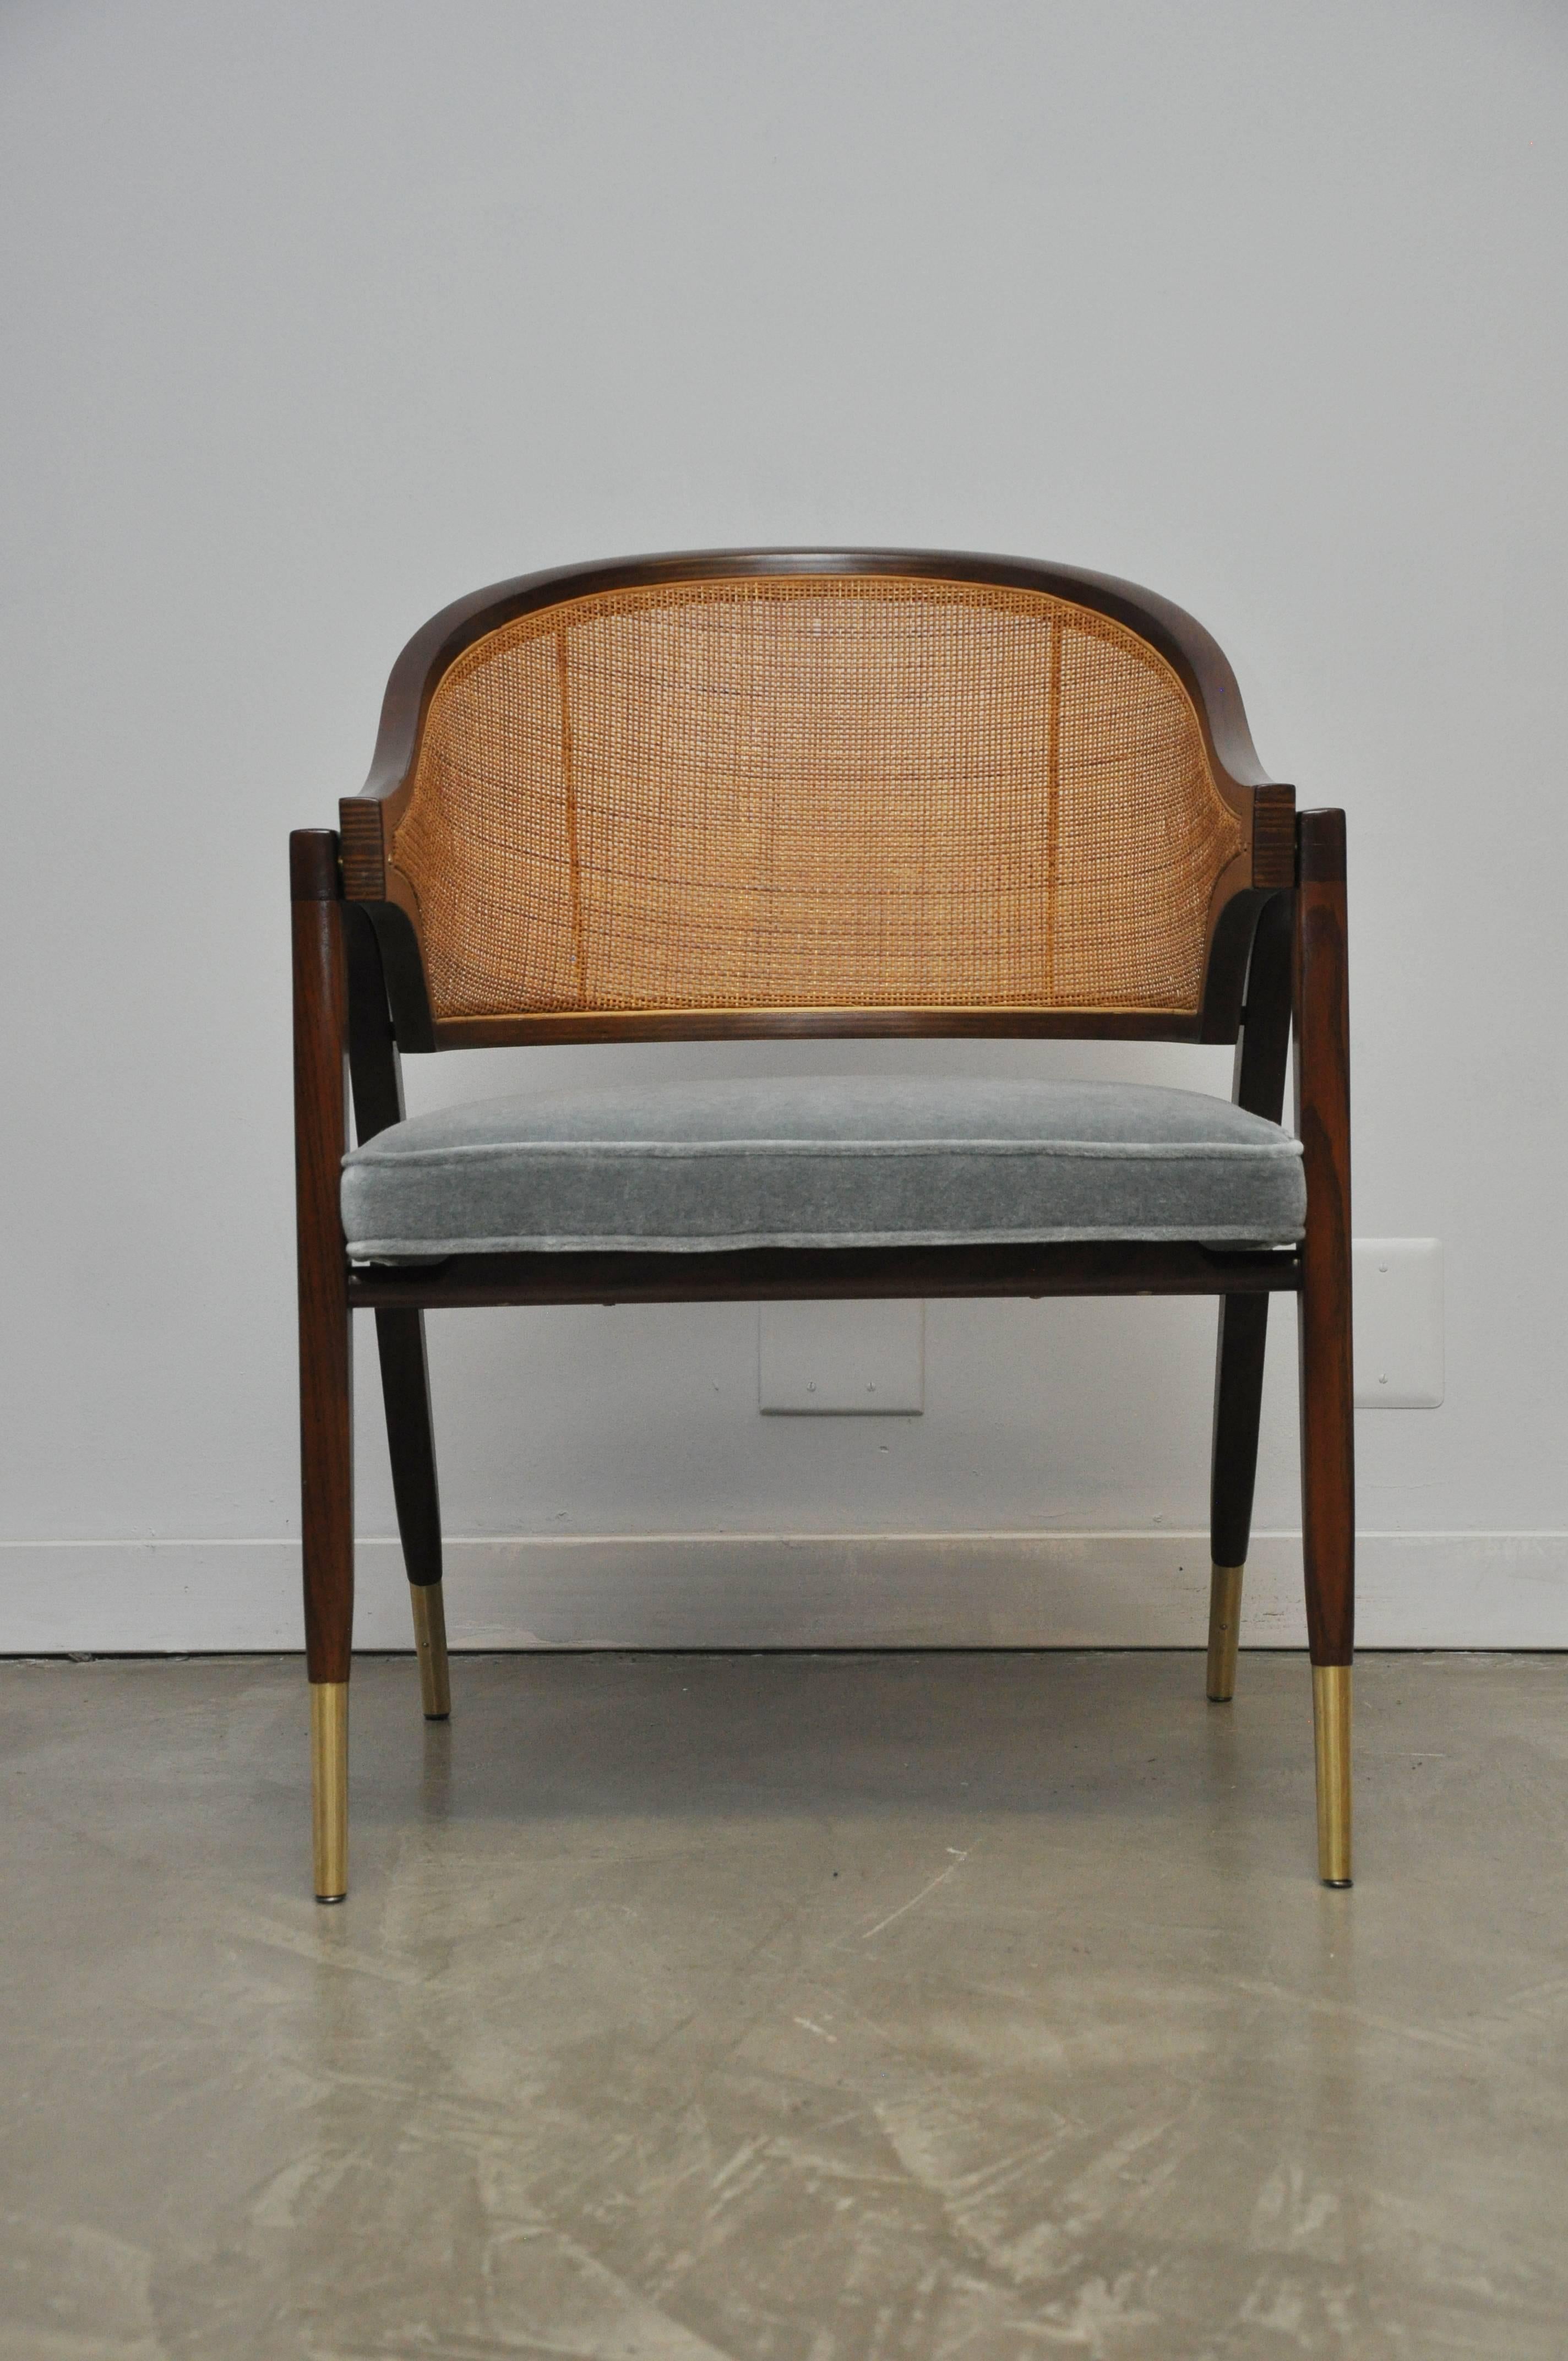 20th Century Pair of Armchairs by Edward Wormley for Dunbar